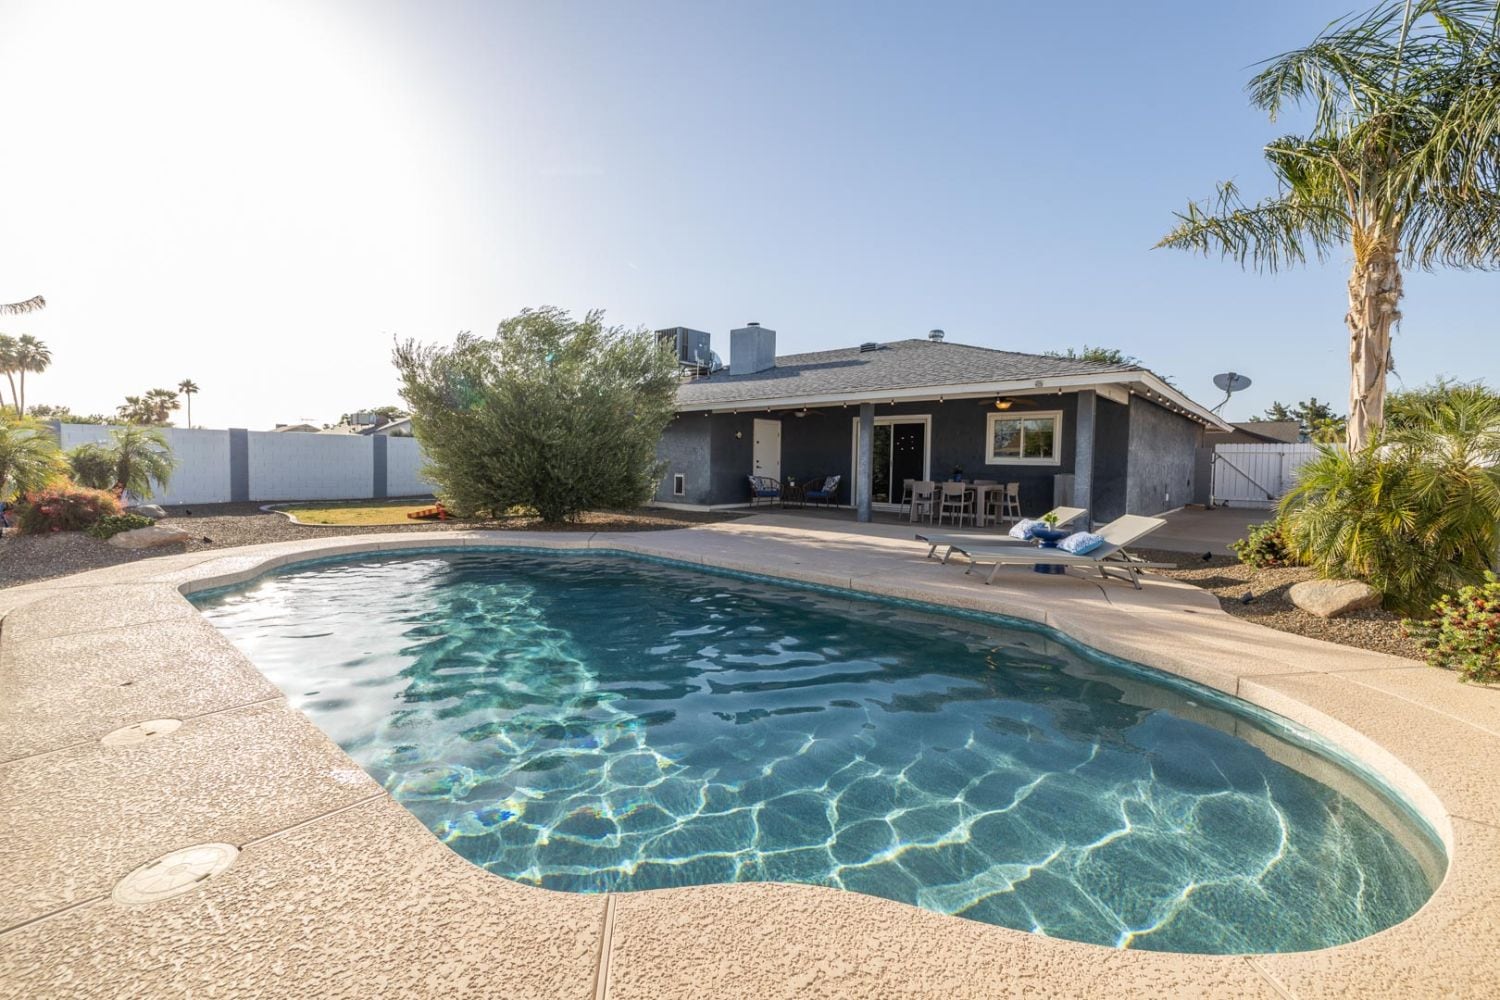 Mesa Garnet - A private, backyard haven with a sparkling heated pool - 